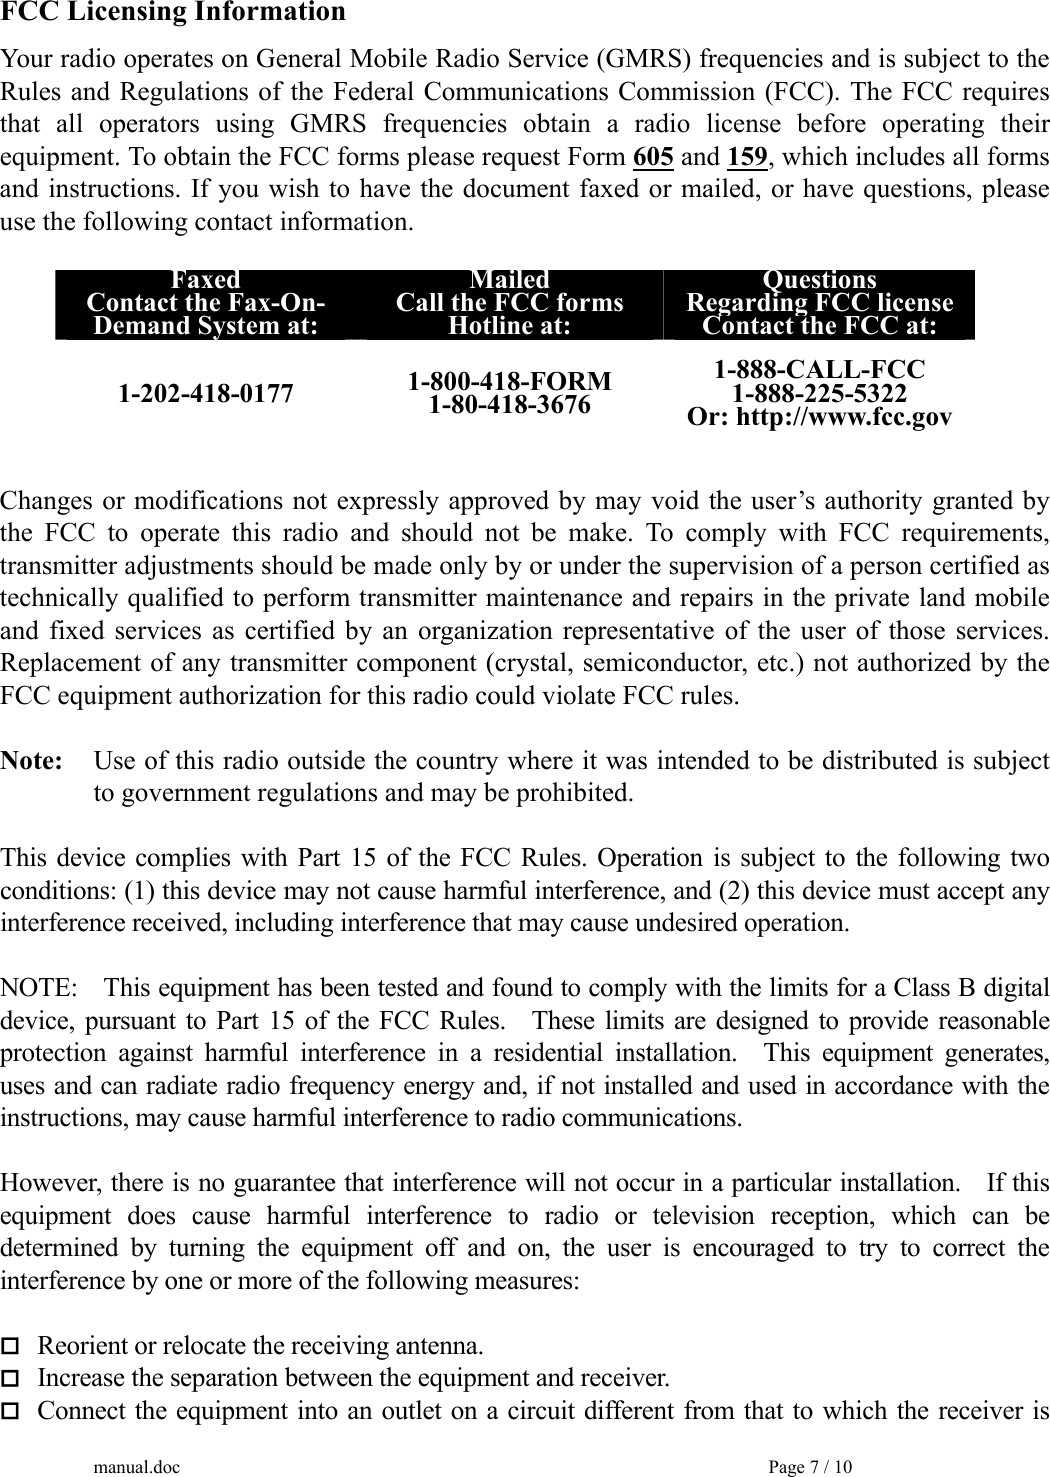 FCC Licensing Information Your radio operates on General Mobile Radio Service (GMRS) frequencies and is subject to the Rules and Regulations of the Federal Communications Commission (FCC). The FCC requires that all operators using GMRS frequencies obtain a radio license before operating their equipment. To obtain the FCC forms please request Form 605 and 159, which includes all forms and instructions. If you wish to have the document faxed or mailed, or have questions, please use the following contact information.  Faxed Contact the Fax-On- Demand System at: Mailed Call the FCC forms Hotline at: Questions Regarding FCC license Contact the FCC at: 1-202-418-0177  1-800-418-FORM 1-80-418-3676 1-888-CALL-FCC 1-888-225-5322 Or: http://www.fcc.gov  Changes or modifications not expressly approved by may void the user’s authority granted by the FCC to operate this radio and should not be make. To comply with FCC requirements, transmitter adjustments should be made only by or under the supervision of a person certified as technically qualified to perform transmitter maintenance and repairs in the private land mobile and fixed services as certified by an organization representative of the user of those services. Replacement of any transmitter component (crystal, semiconductor, etc.) not authorized by the FCC equipment authorization for this radio could violate FCC rules.  Note:     Use of this radio outside the country where it was intended to be distributed is subject   to government regulations and may be prohibited.  This device complies with Part 15 of the FCC Rules. Operation is subject to the following two conditions: (1) this device may not cause harmful interference, and (2) this device must accept any interference received, including interference that may cause undesired operation.   NOTE:  This equipment has been tested and found to comply with the limits for a Class B digital device, pursuant to Part 15 of the FCC Rules.   These limits are designed to provide reasonable protection against harmful interference in a residential installation.  This equipment generates, uses and can radiate radio frequency energy and, if not installed and used in accordance with the instructions, may cause harmful interference to radio communications.  However, there is no guarantee that interference will not occur in a particular installation.    If this equipment does cause harmful interference to radio or television reception, which can be determined by turning the equipment off and on, the user is encouraged to try to correct the interference by one or more of the following measures:   Reorient or relocate the receiving antenna.  Increase the separation between the equipment and receiver.  Connect the equipment into an outlet on a circuit different from that to which the receiver is manual.doc    Page 7 / 10 